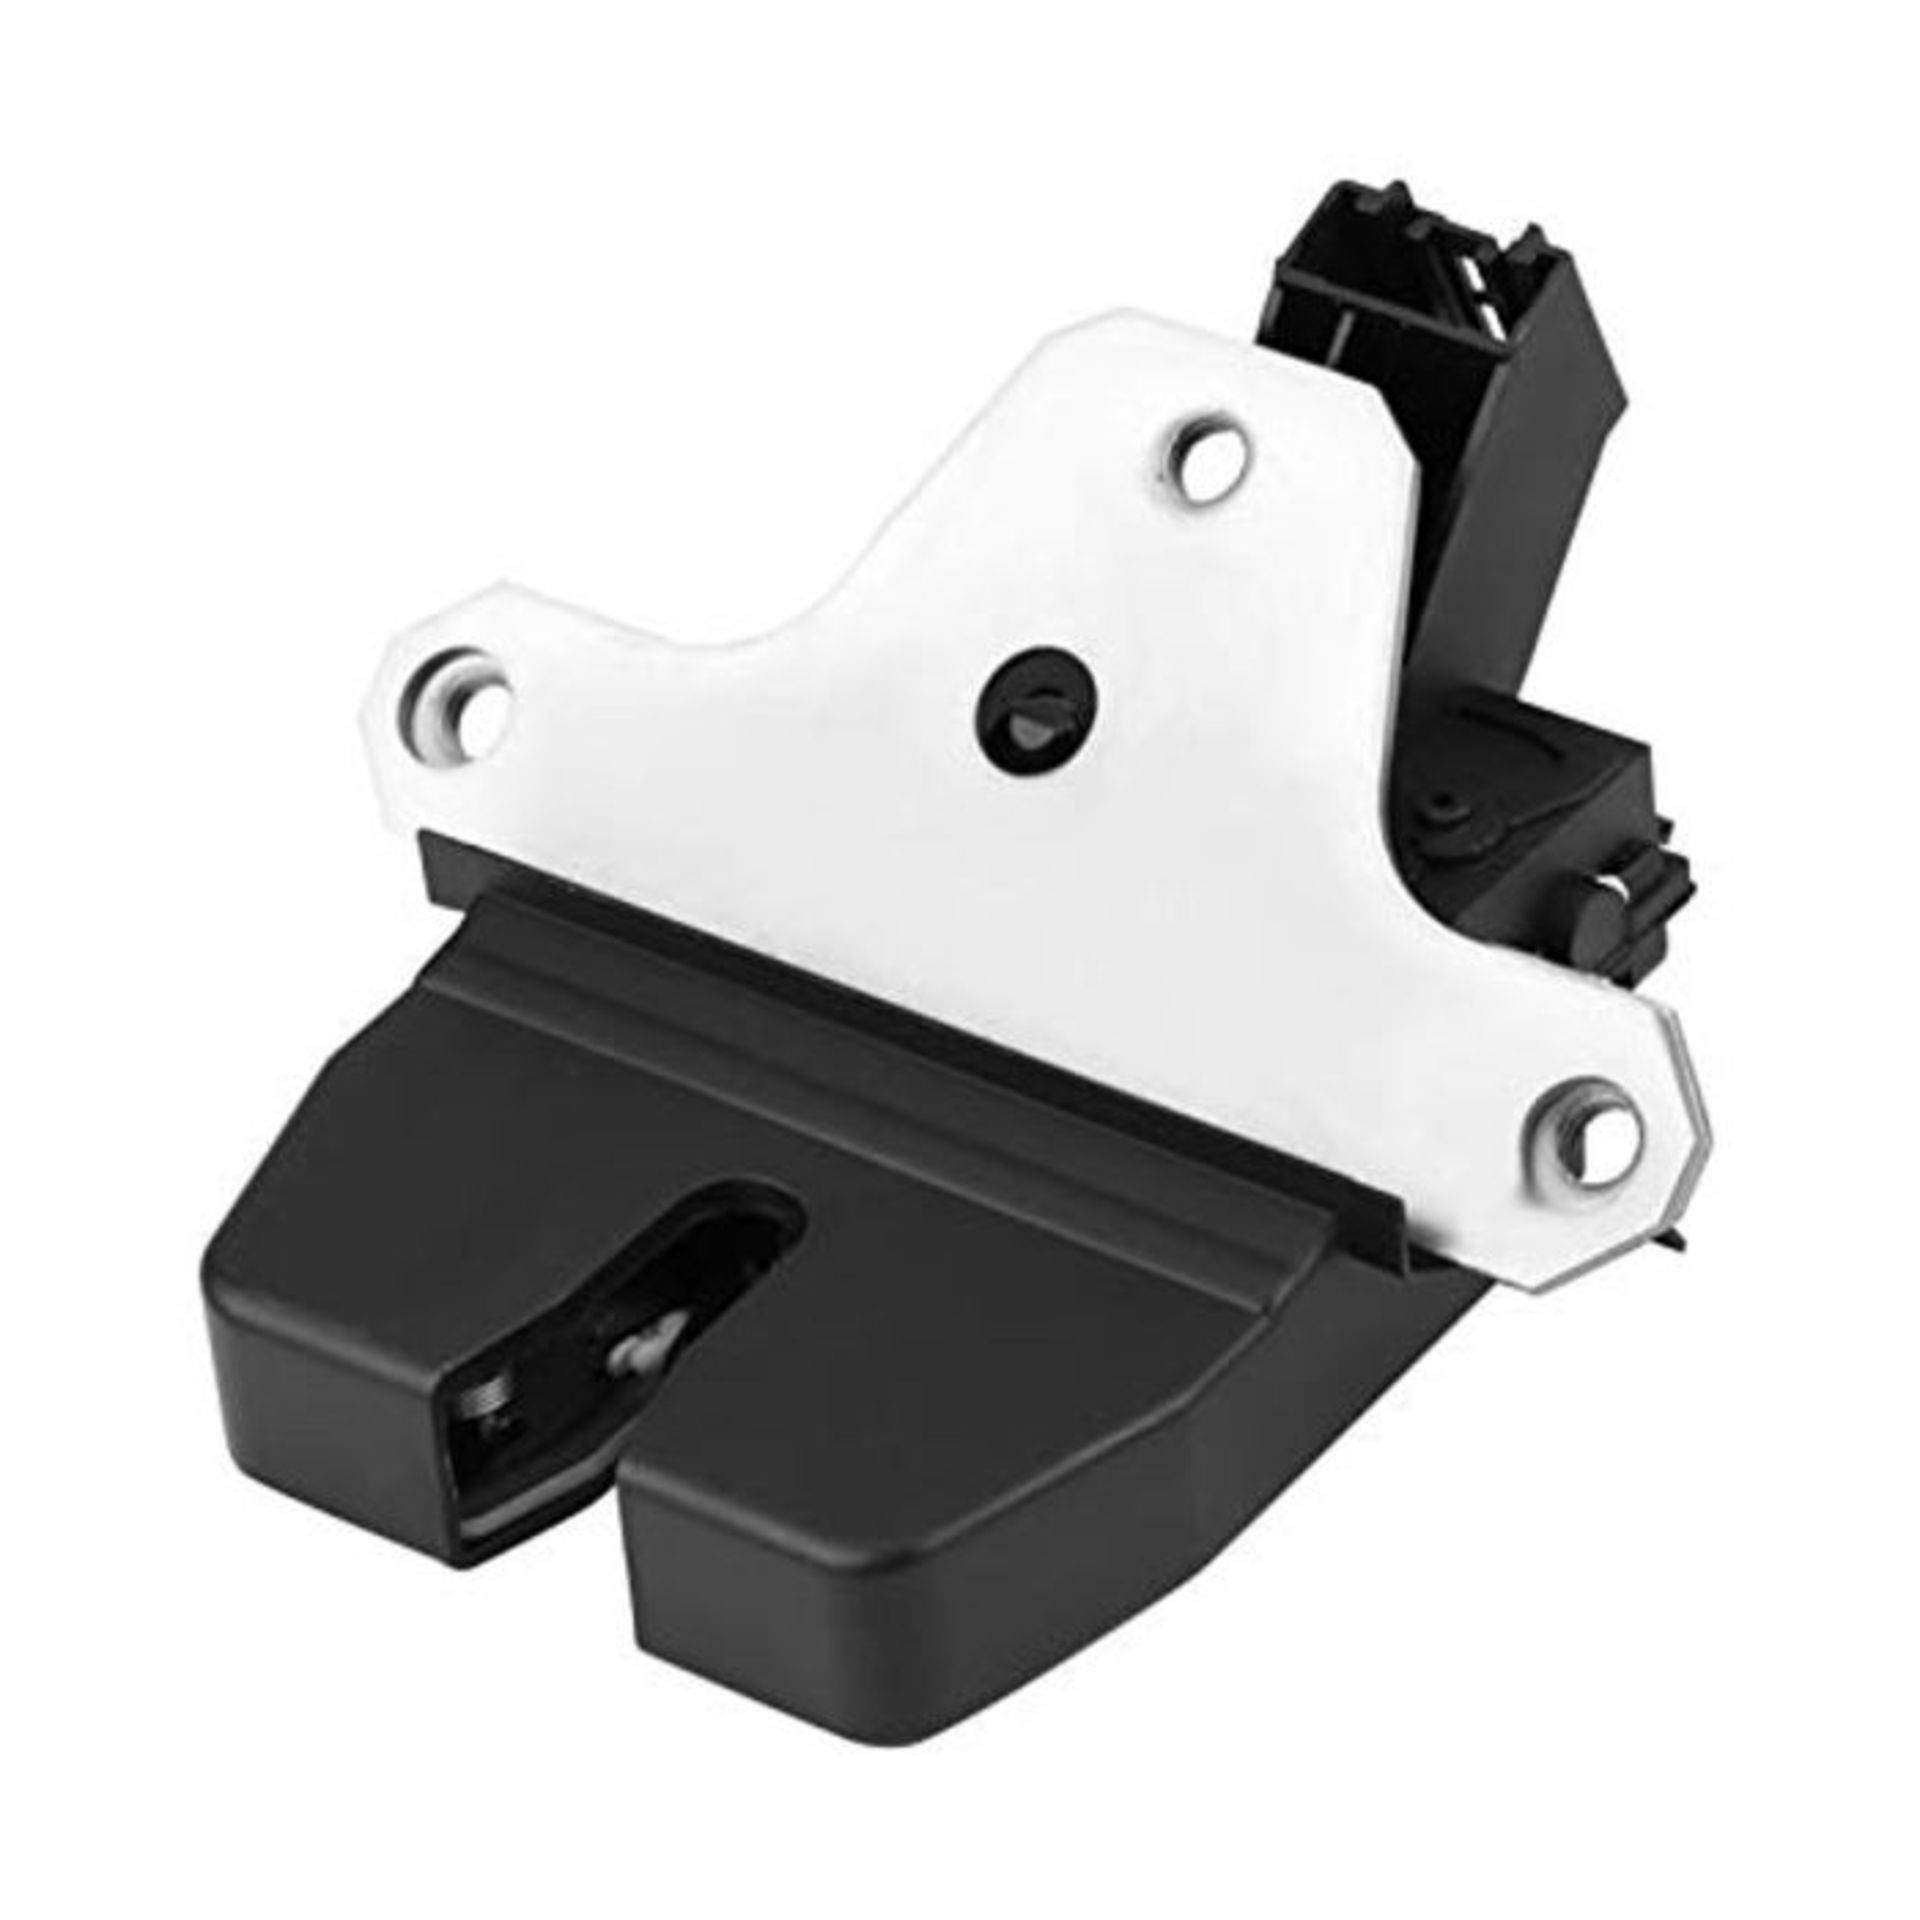 KASturbo Rear Tailgate Lock, Car Trunk Boot Latch Actuator for Focus S-Max 8M51R442A66